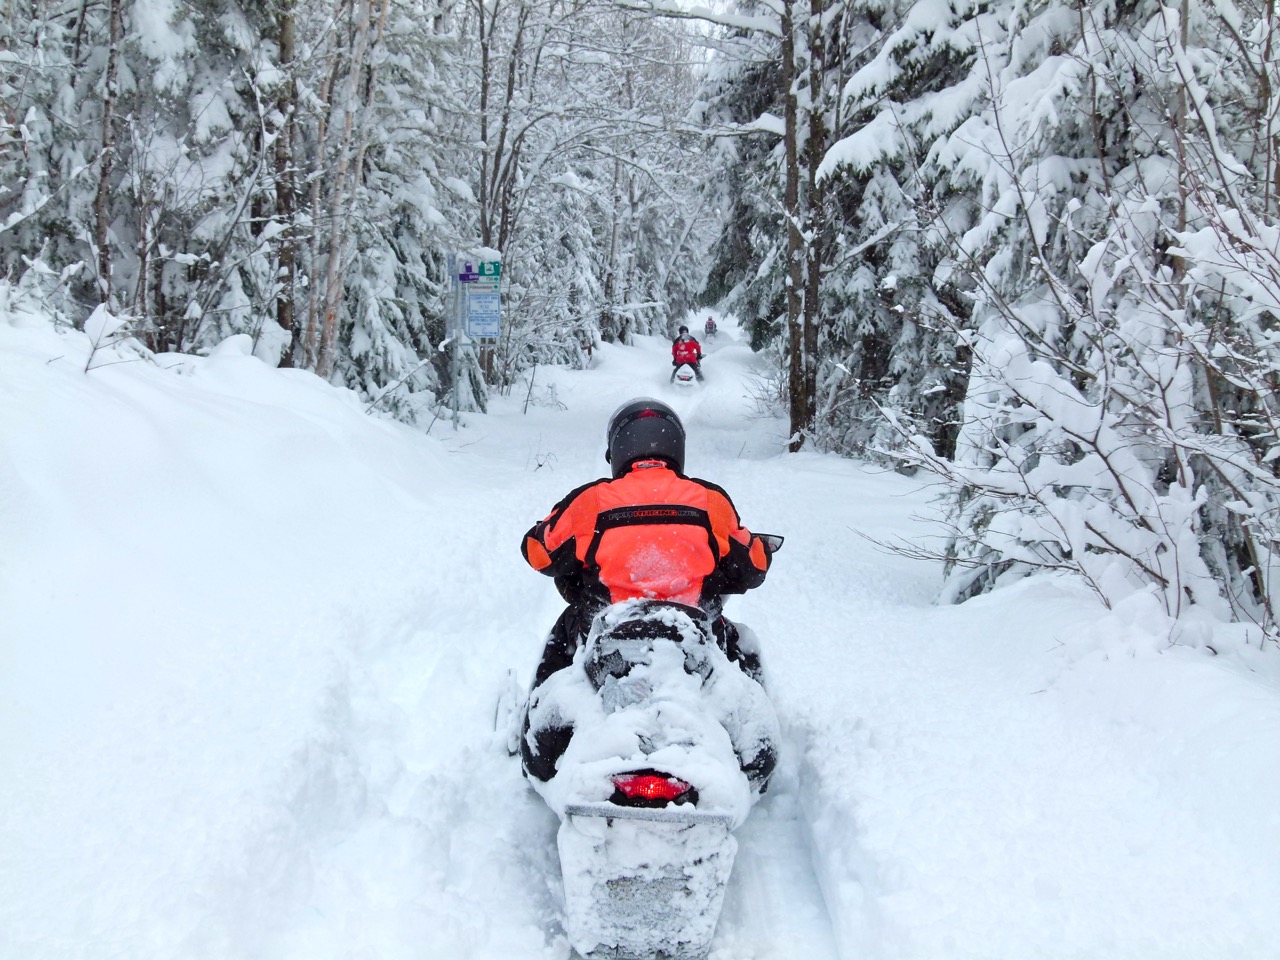 Trail buried after recent snow storm to Snowmobile New Brunswick